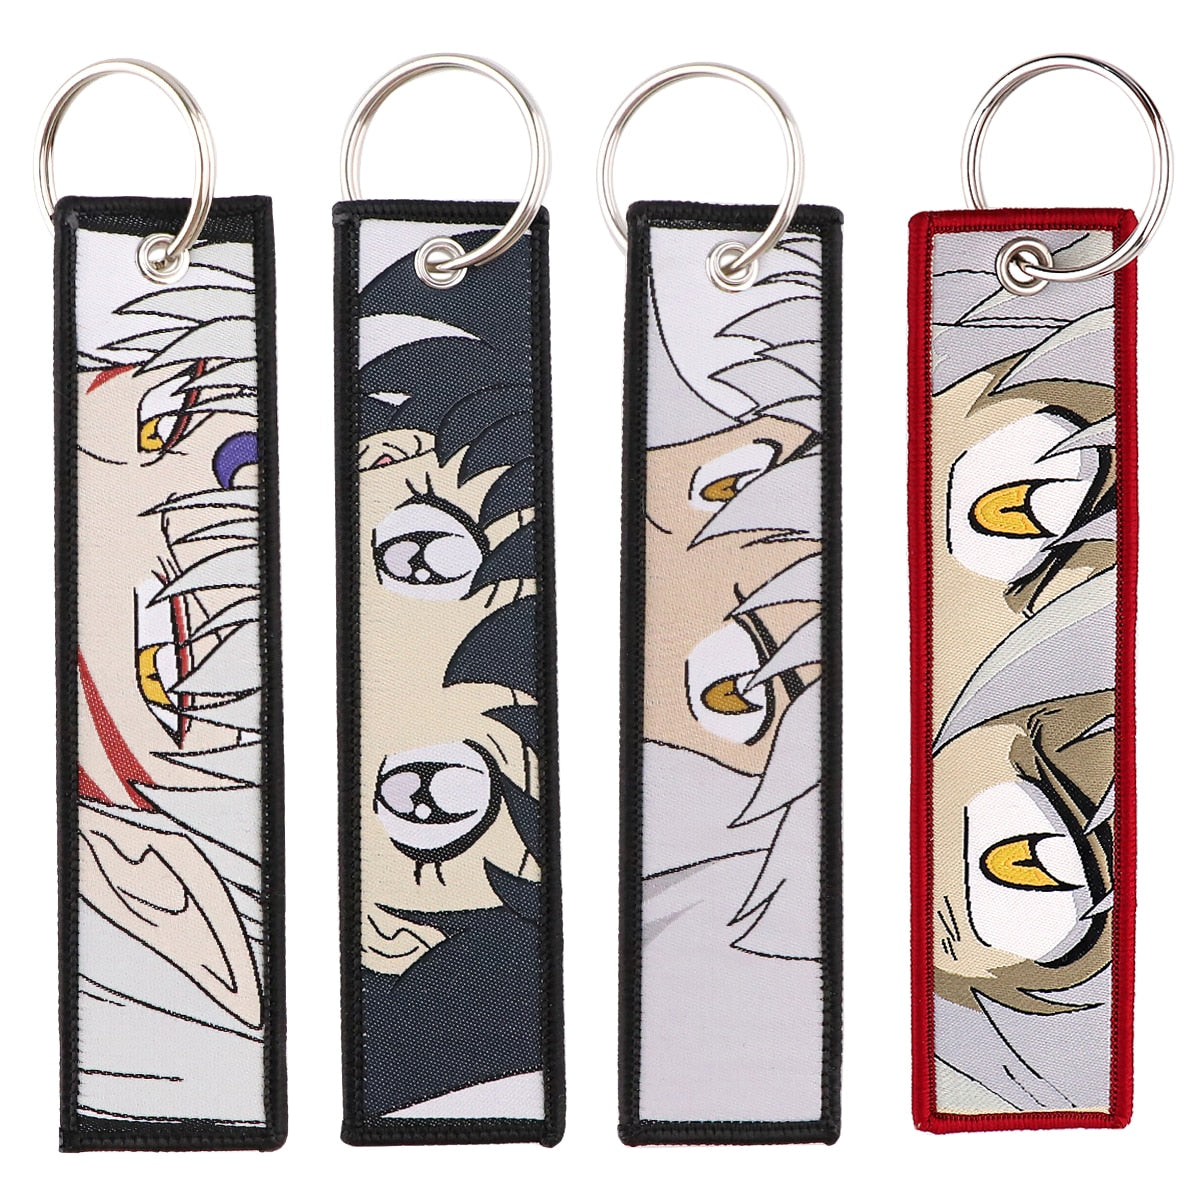 Japanese Anime INUYASHA Cool Key Tag Embroidery Key Fobs For Motorcycles Cars Bag Backpack Keychain Fashion Key Ring Gifts